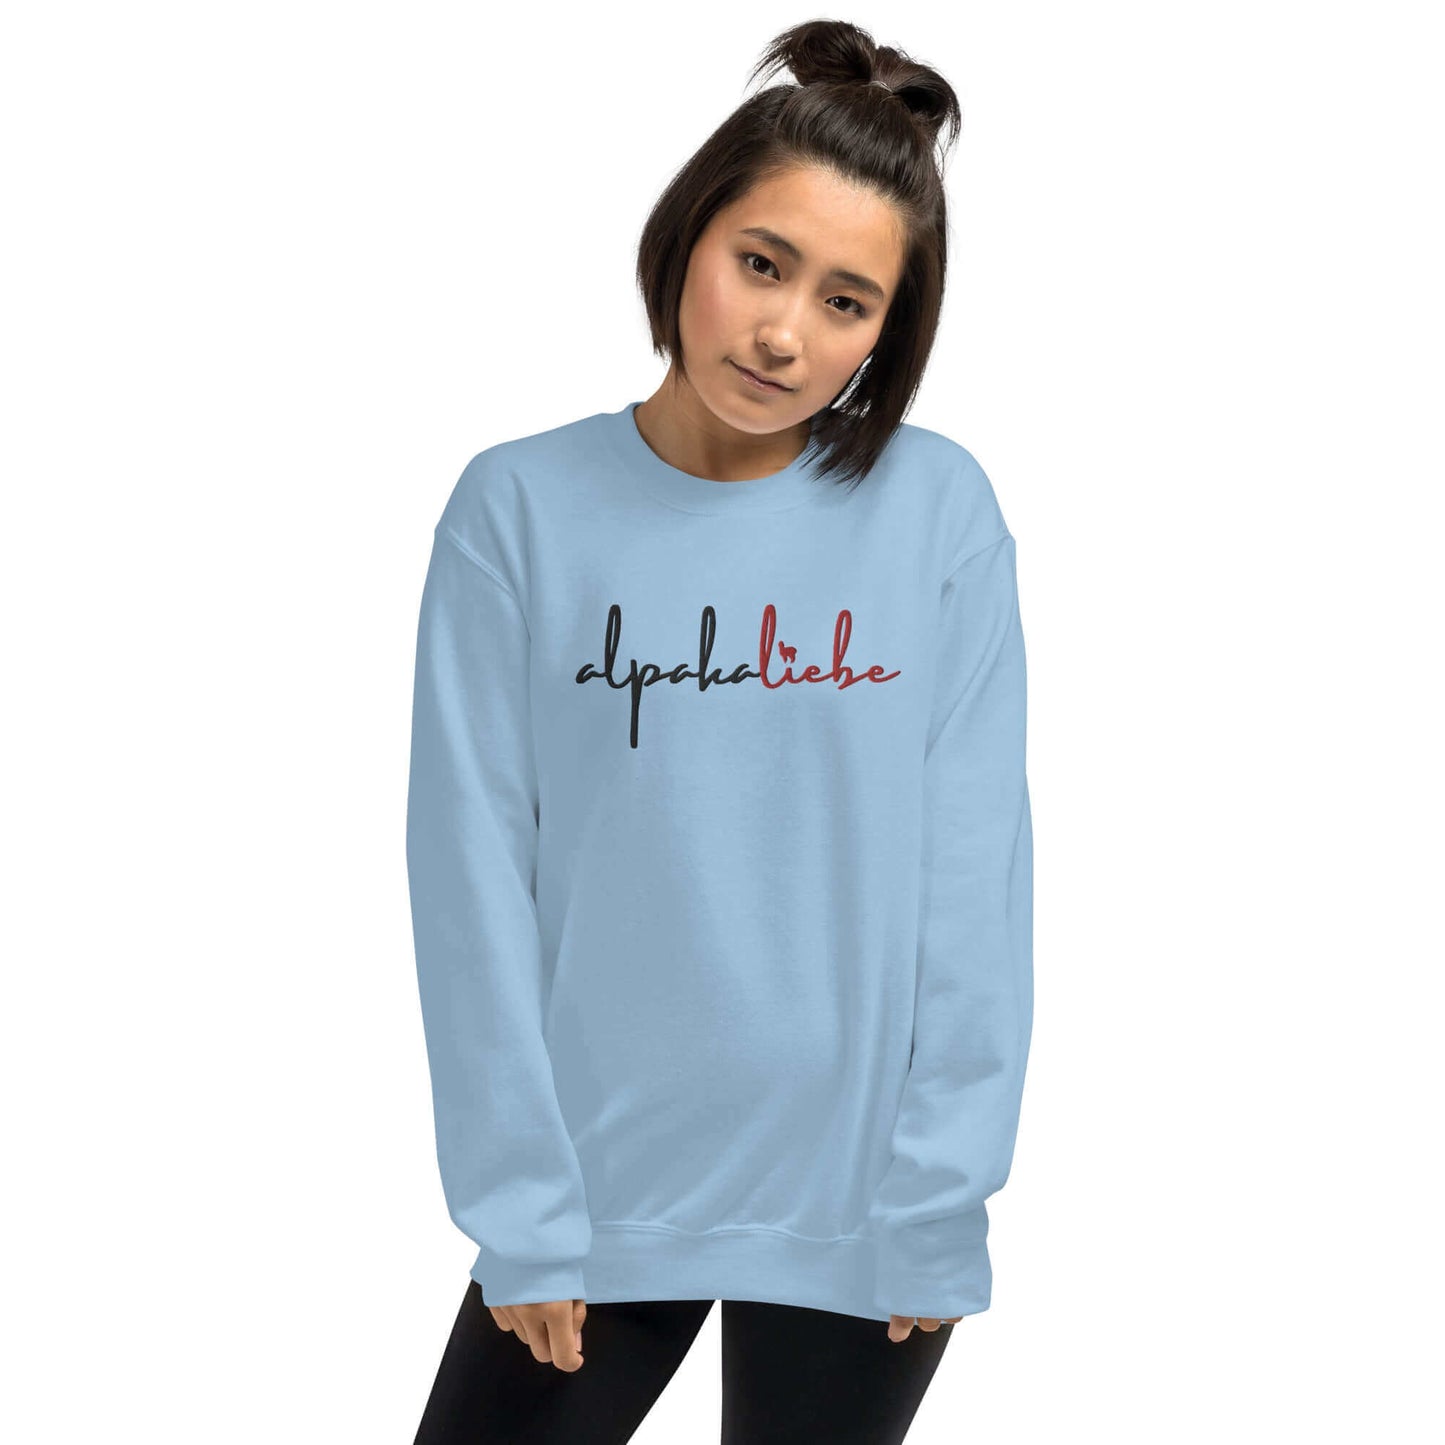 Sweater with 'alpakaliebe' embroidery | Self-designed design with alpaca silhouette | Comfortable cotton & polyester mix